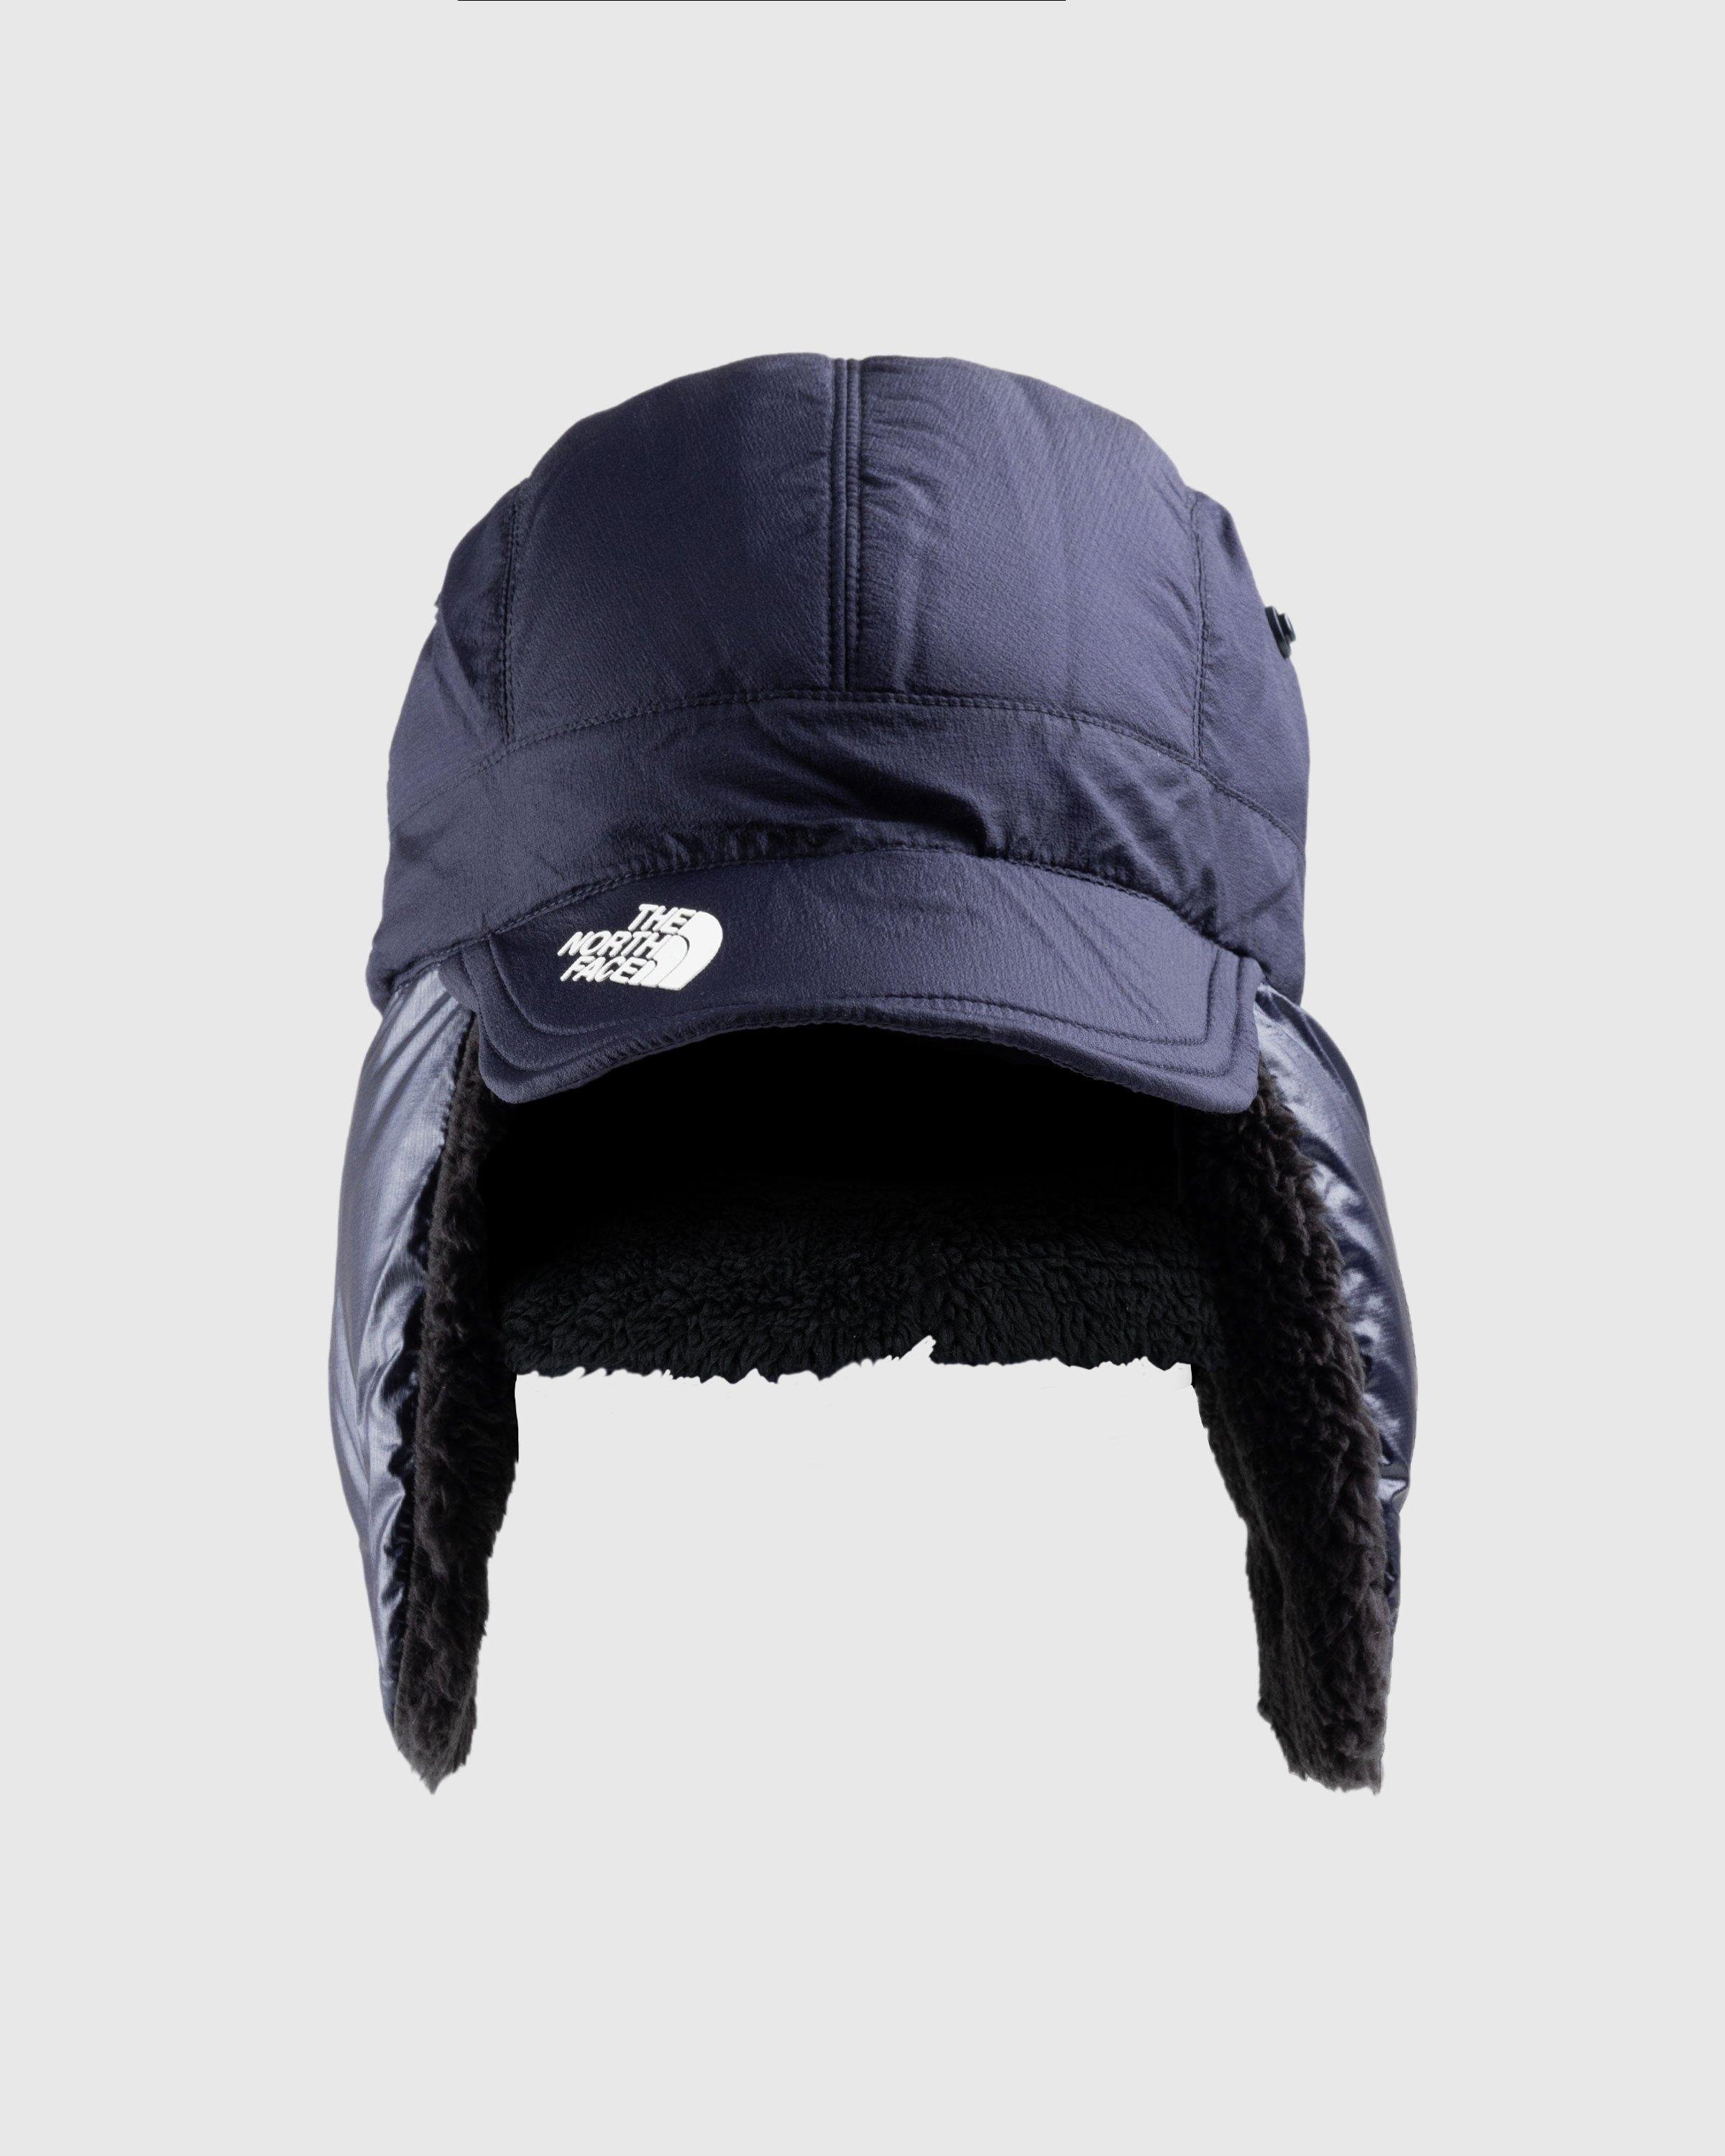 The North Face x UNDERCOVERSoukuu Down Cap Black/Navy by HIGHSNOBIETY